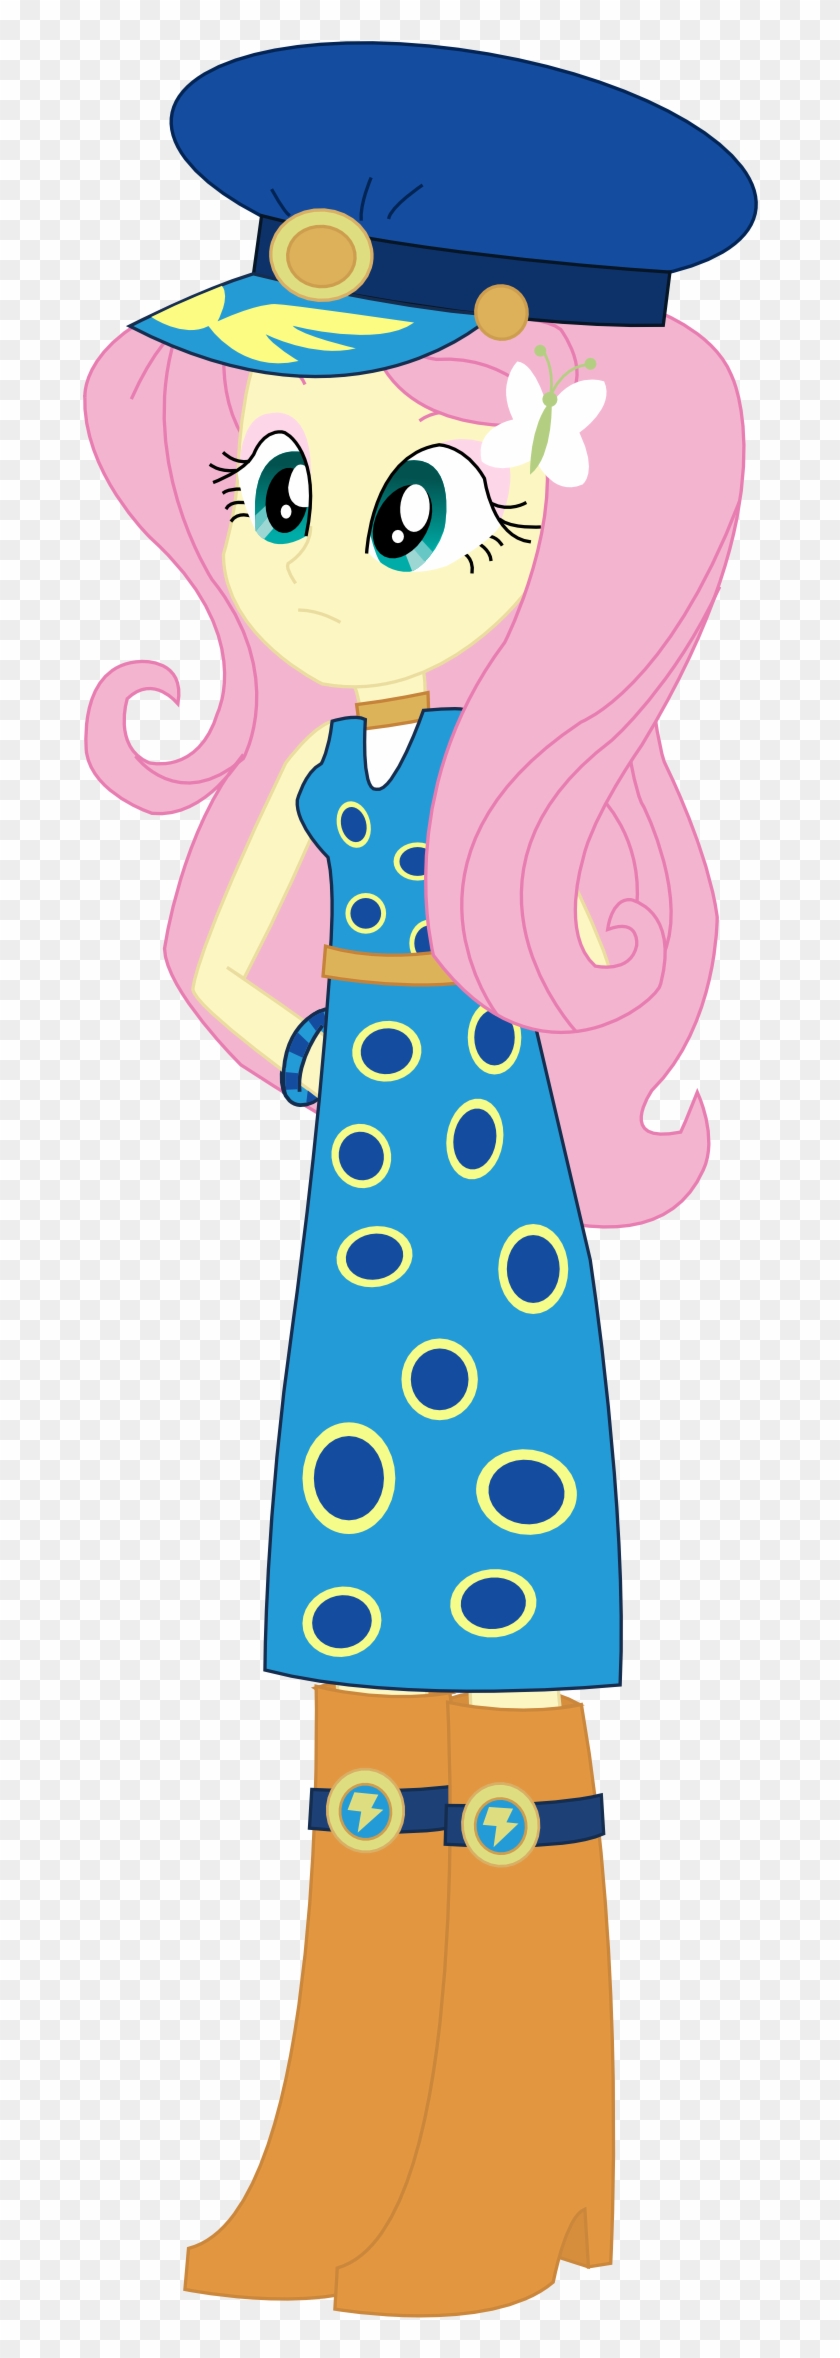 Sketchmcreations Equestria Girls Fluttershy By Sketchmcreations - Equestria Girls Fluttershy Gala #776642